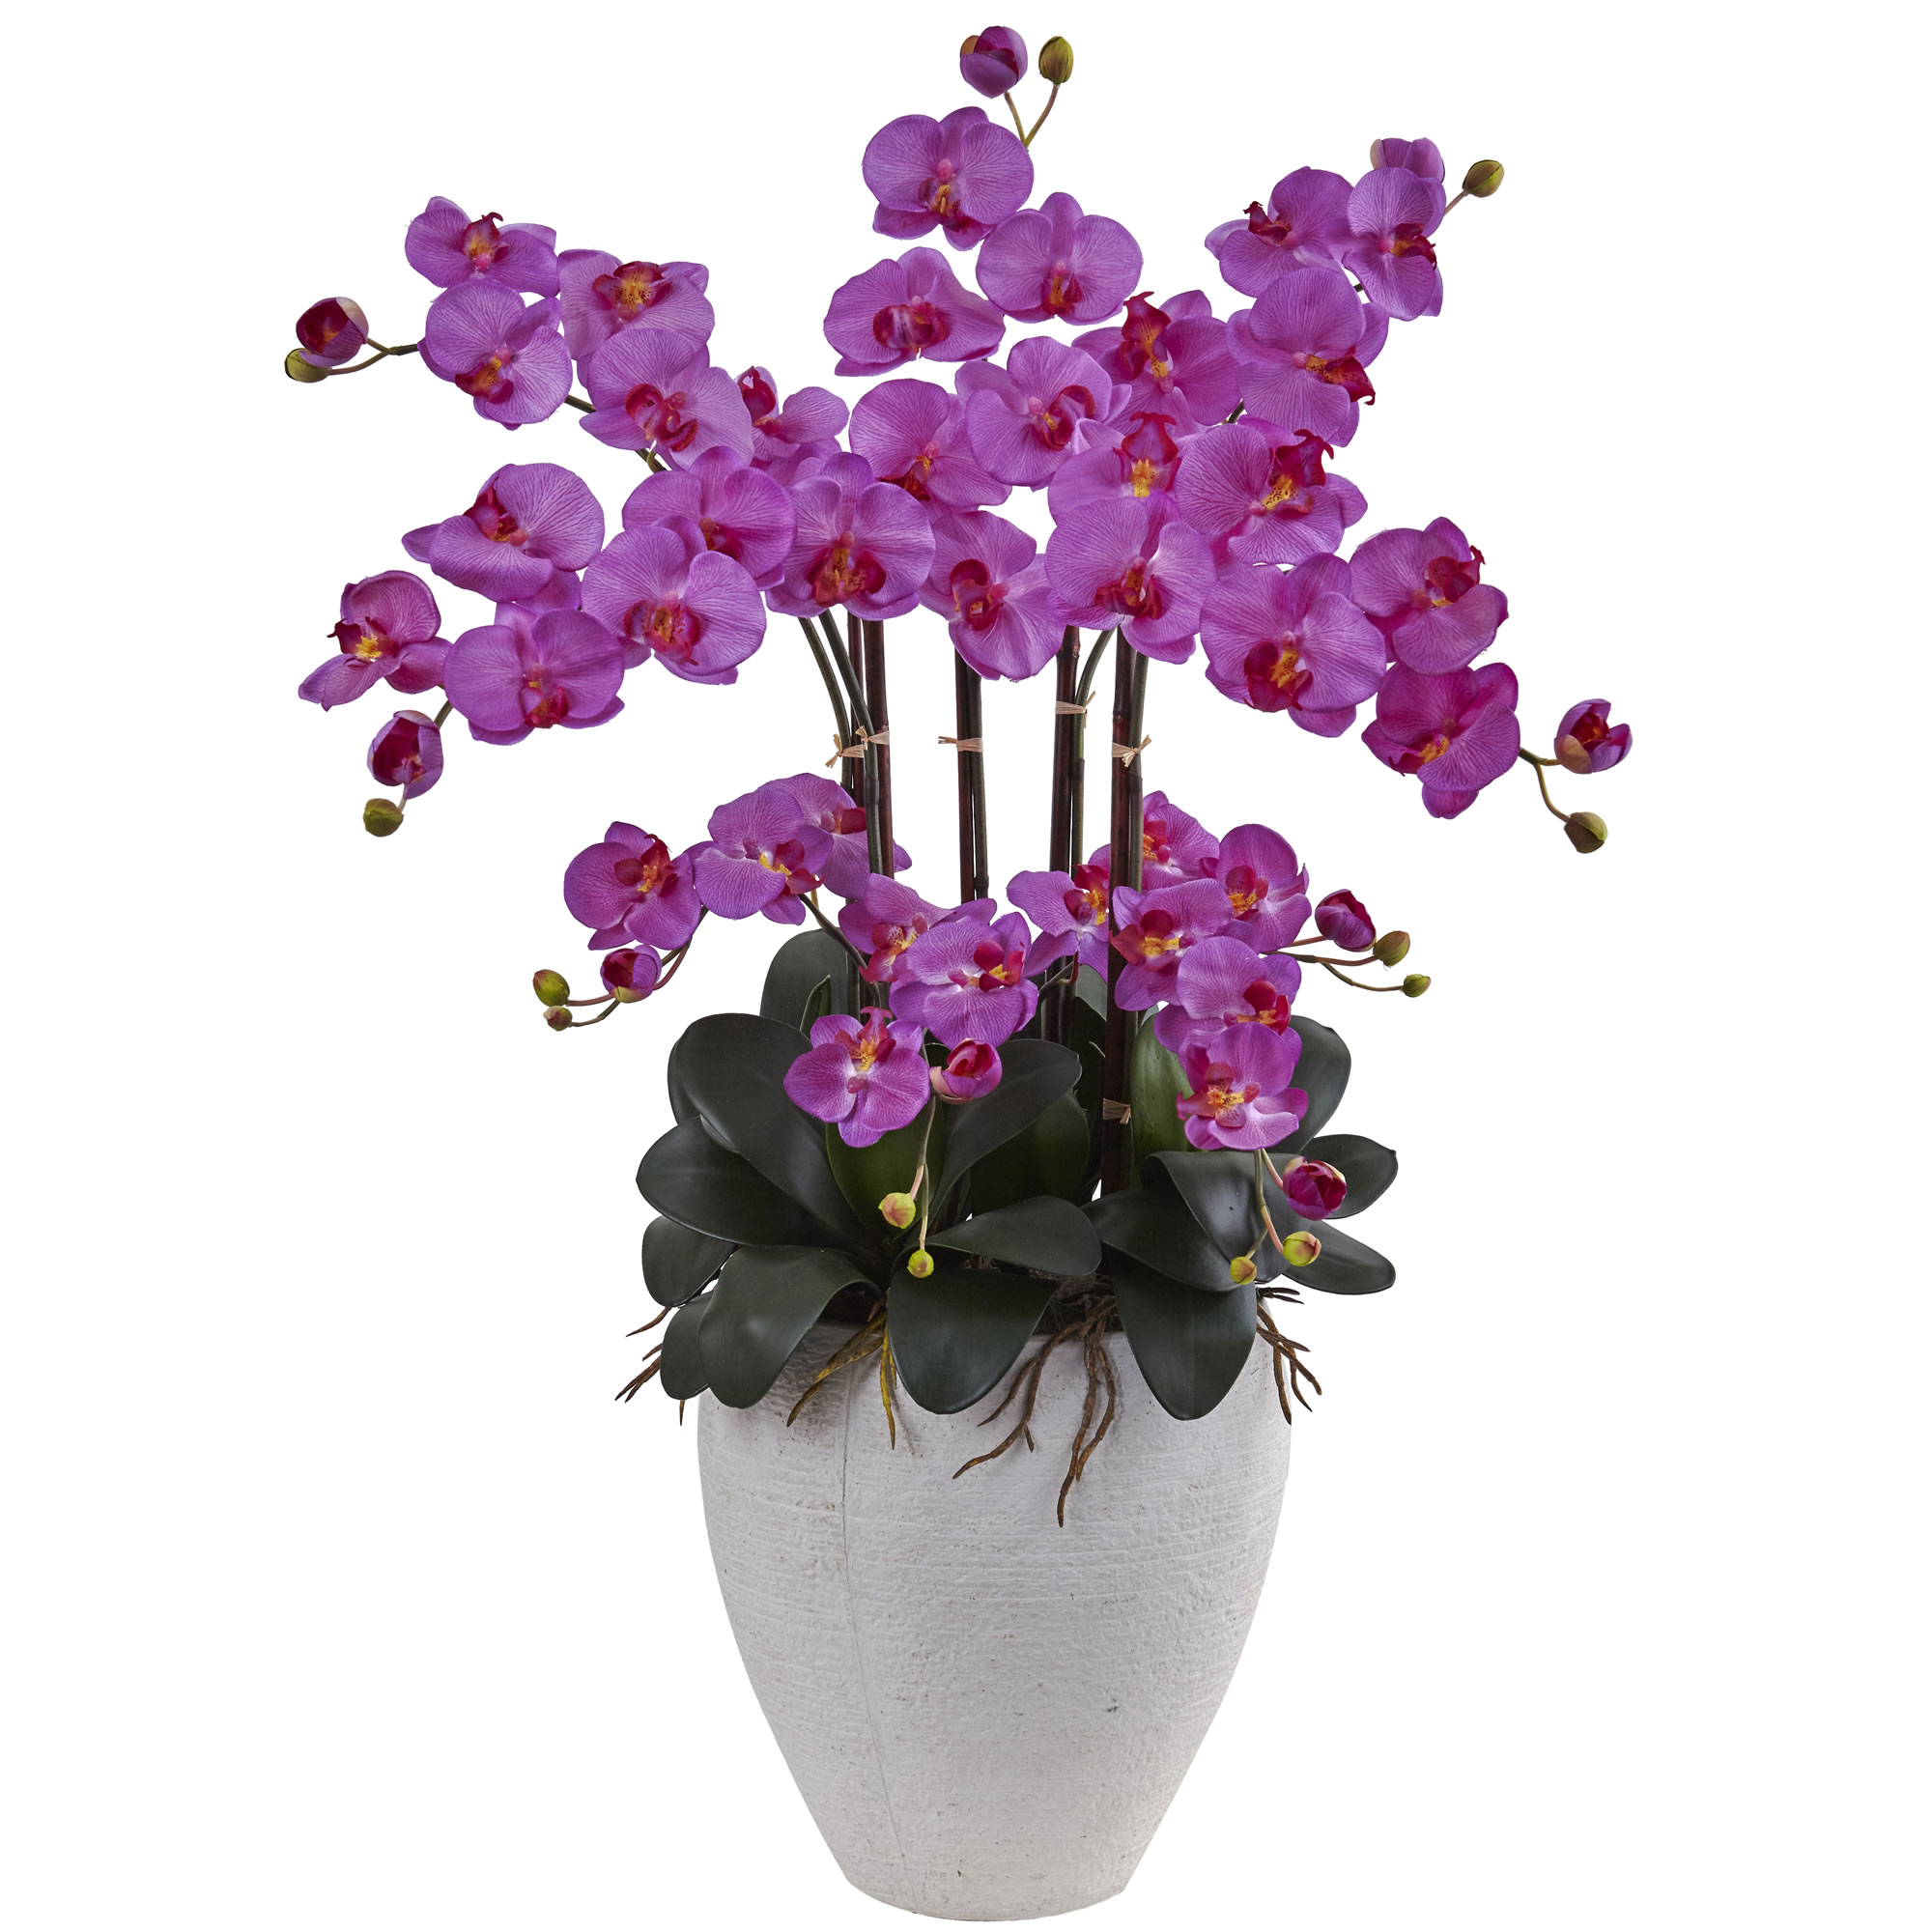 Phalenopsis orchids